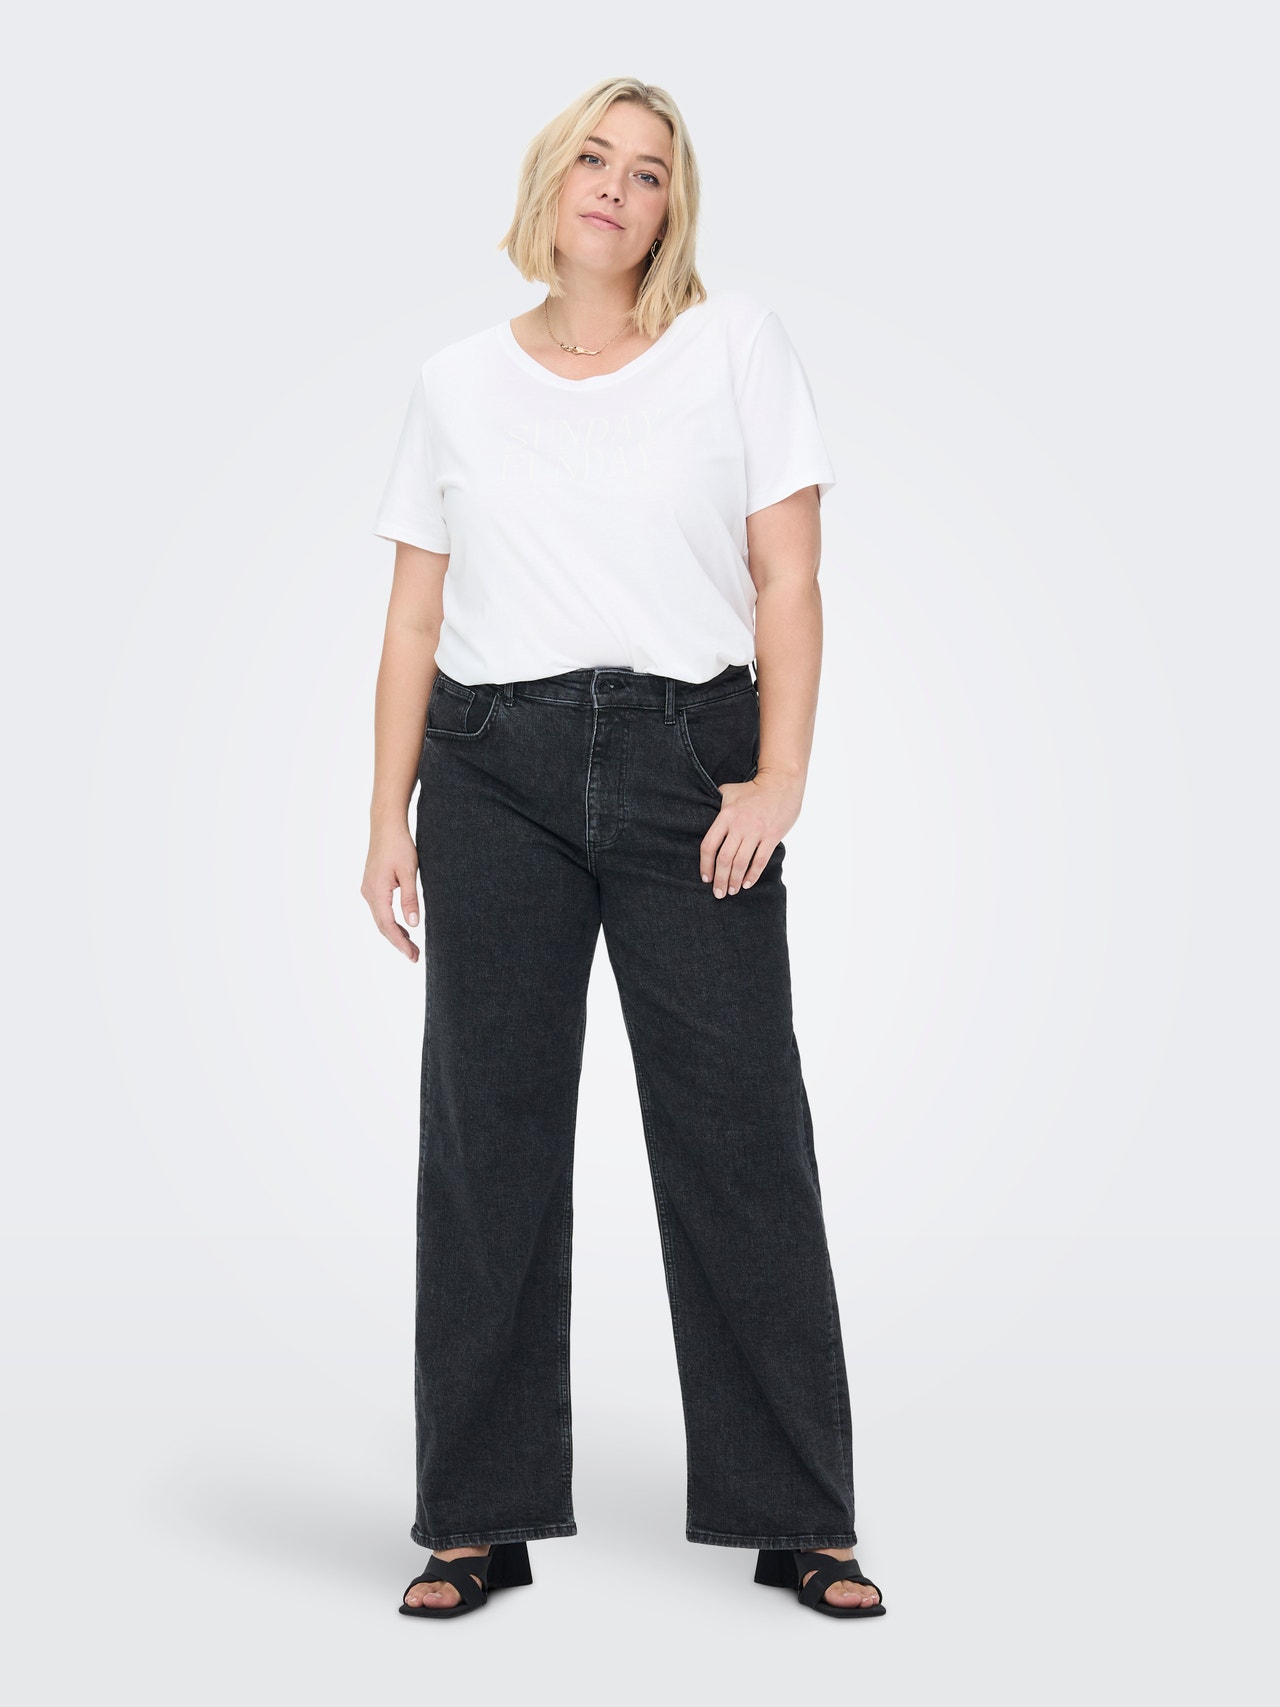 ONLY Curvy CARJules Wide High Waist Jeans -Black - 15265201